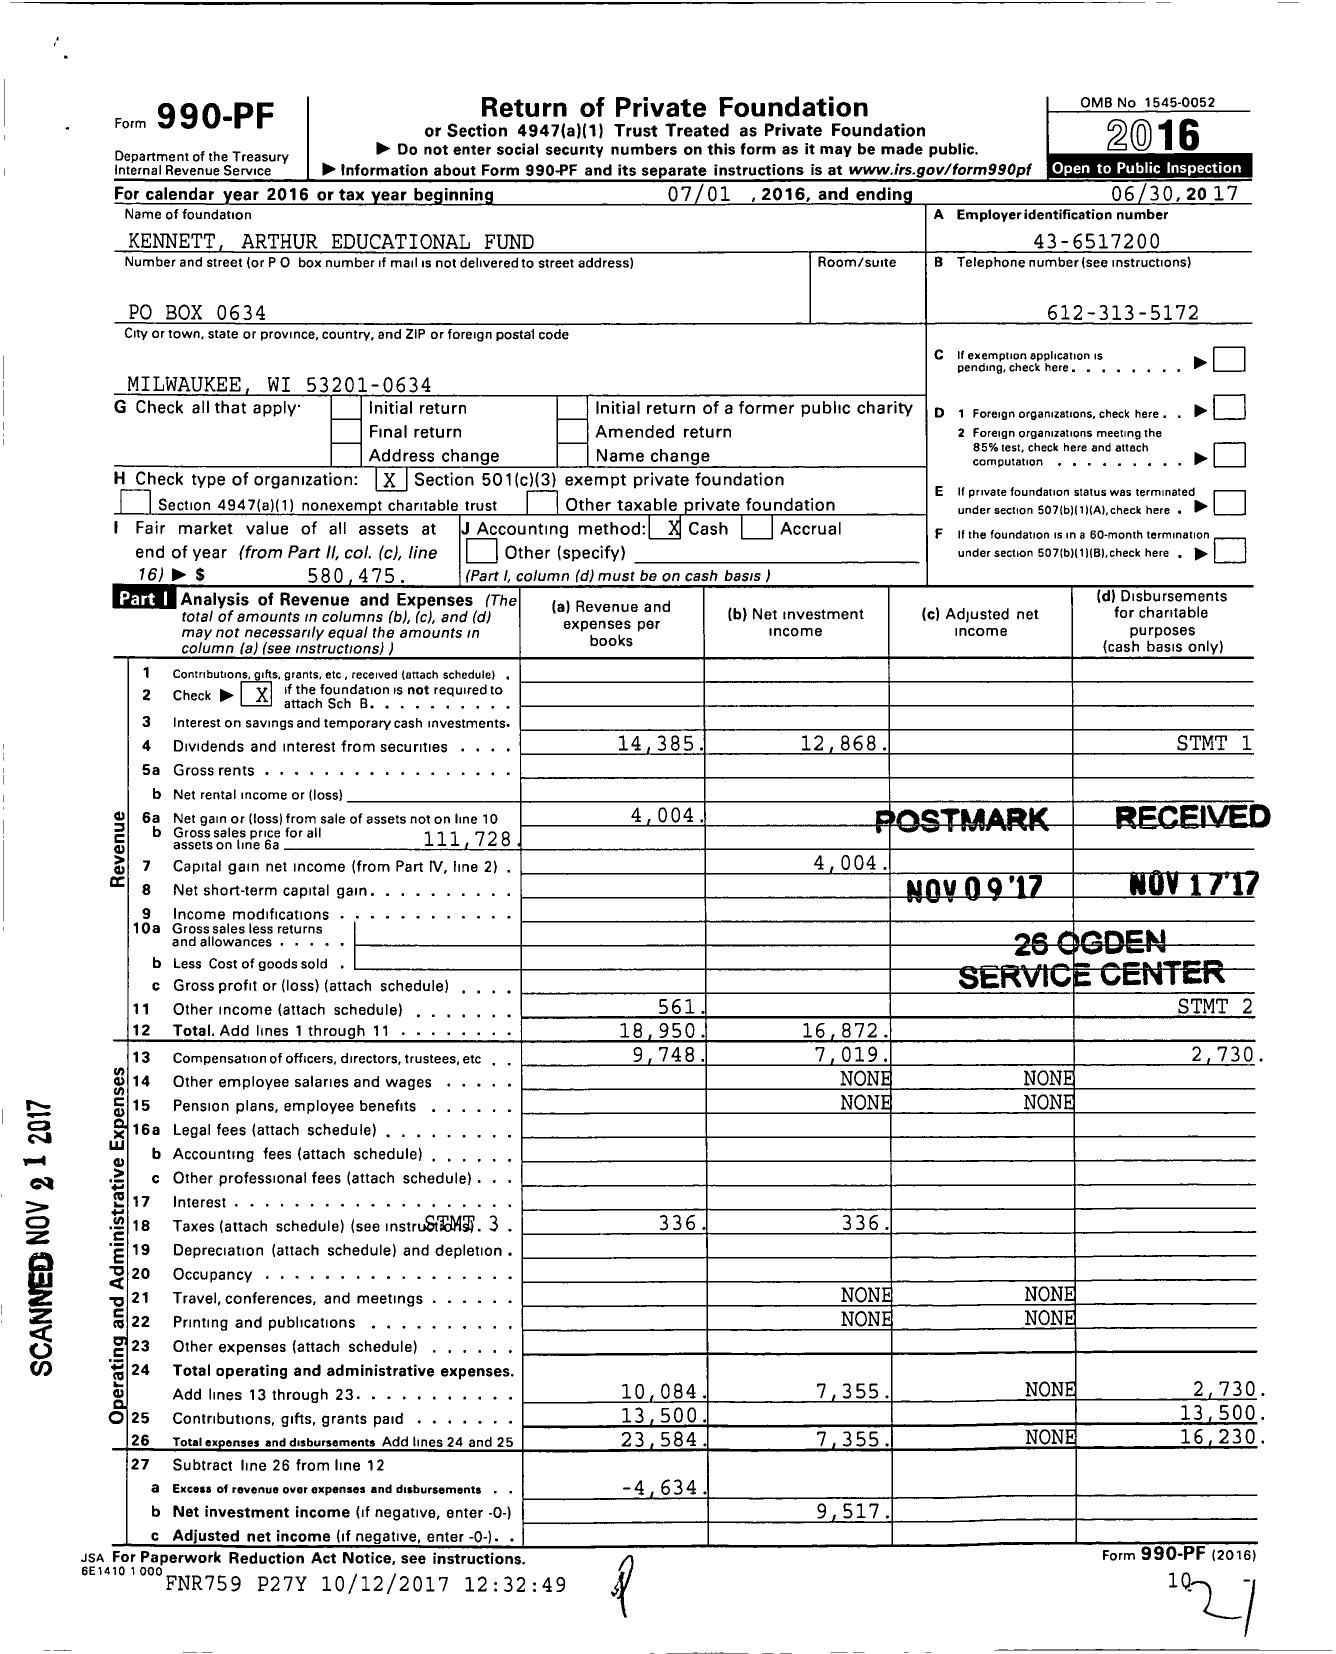 Image of first page of 2016 Form 990PF for Kennett Arthur Educational Fund